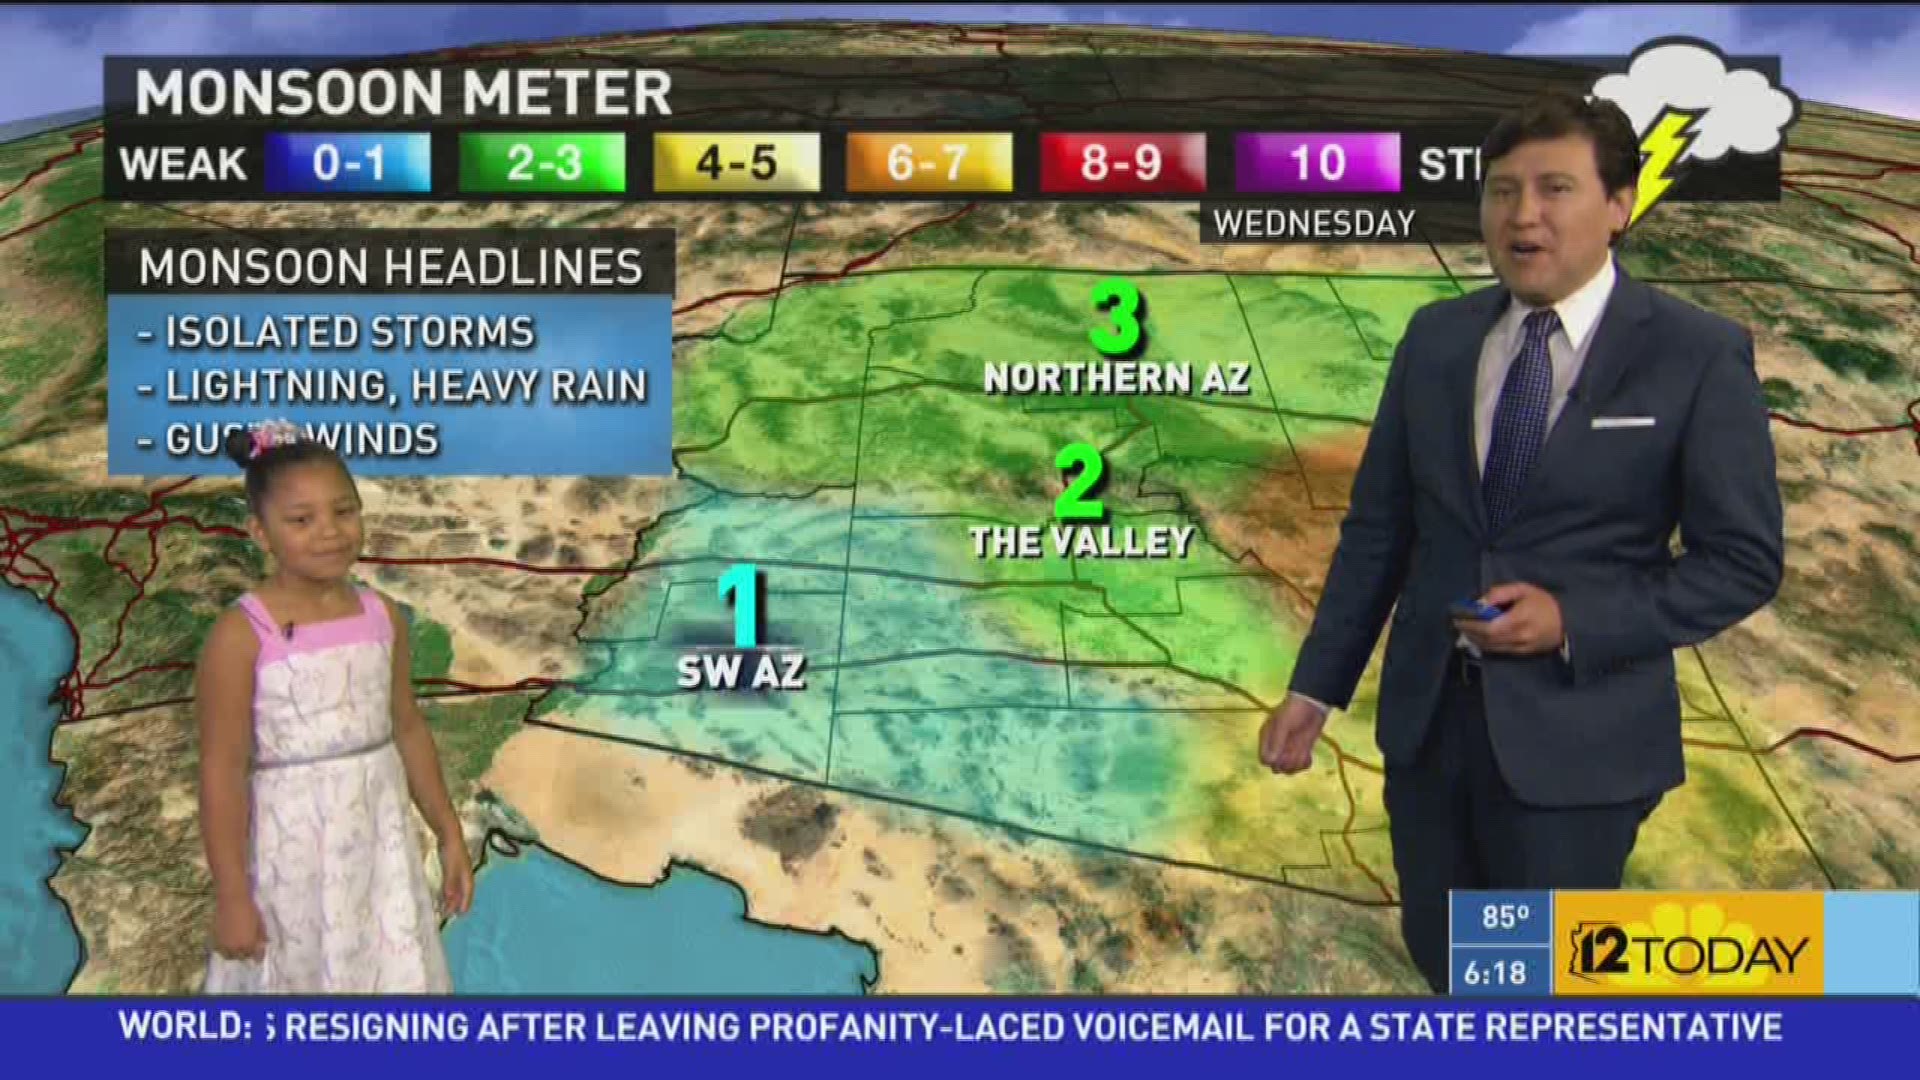 Rachel from Chandler helps Jimmy Q give a weather update and 7-day forecast.